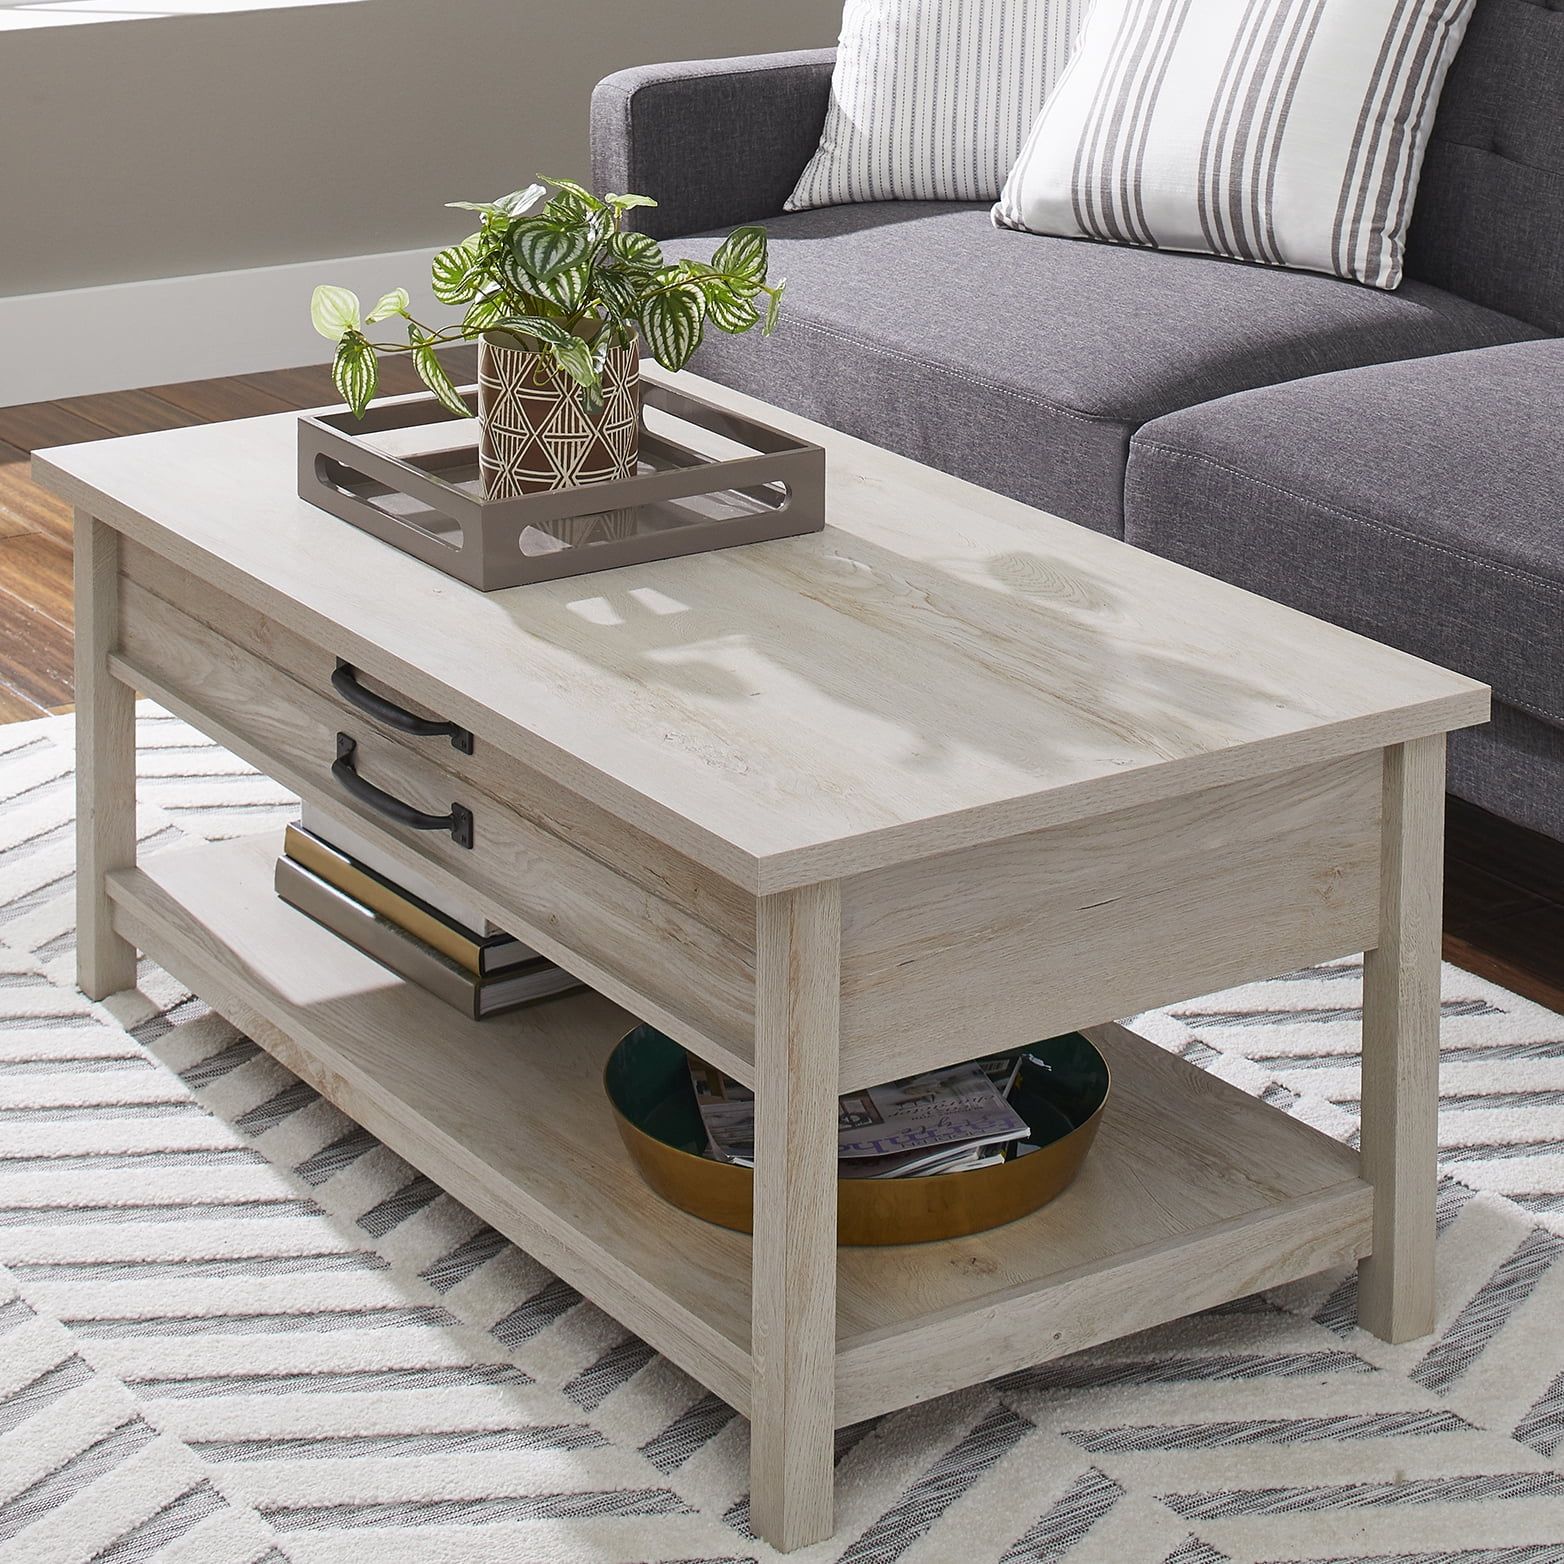 Better Homes & Gardens Modern Farmhouse Rectangle Lift Top Coffee Table, Rustic White finish | Walmart (US)